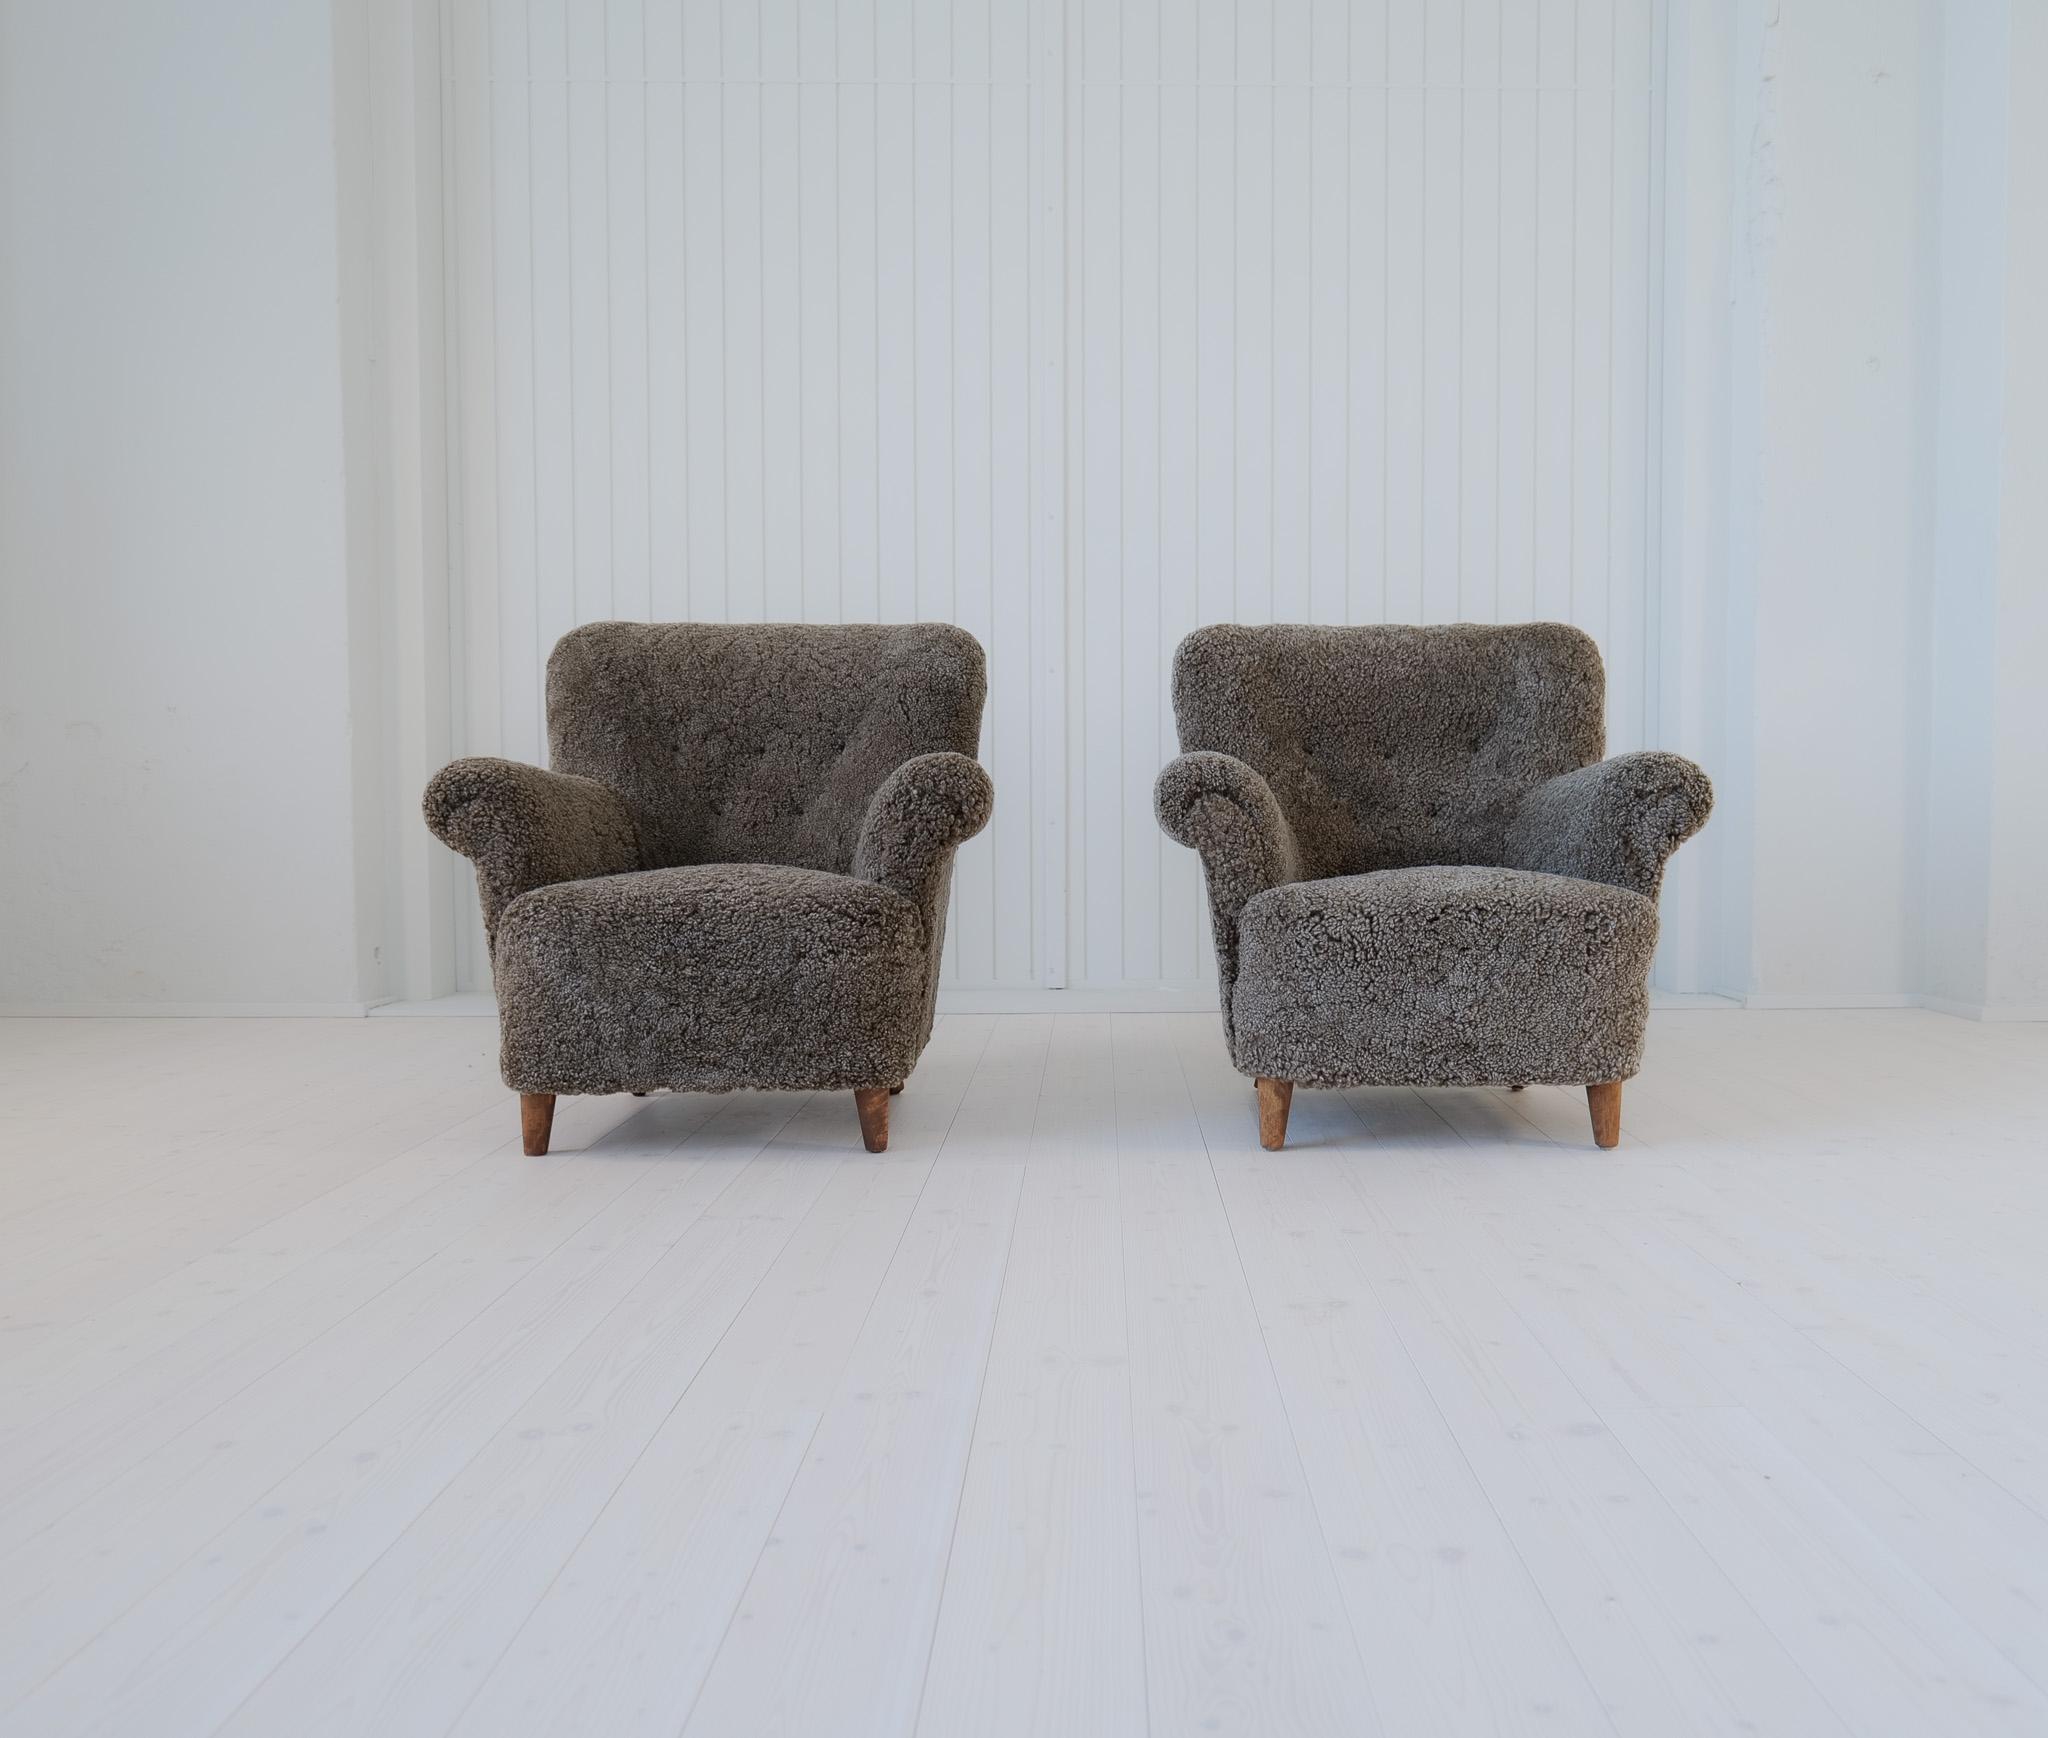 Pair of Swedish modern lounge chairs, with the typical look of its time.
These ones are fully restored and reupholstered with black/grey sheepskin - Shearling.
Beautiful to look at and cozy to sit in. The legs made in stained birch. 

Excellent